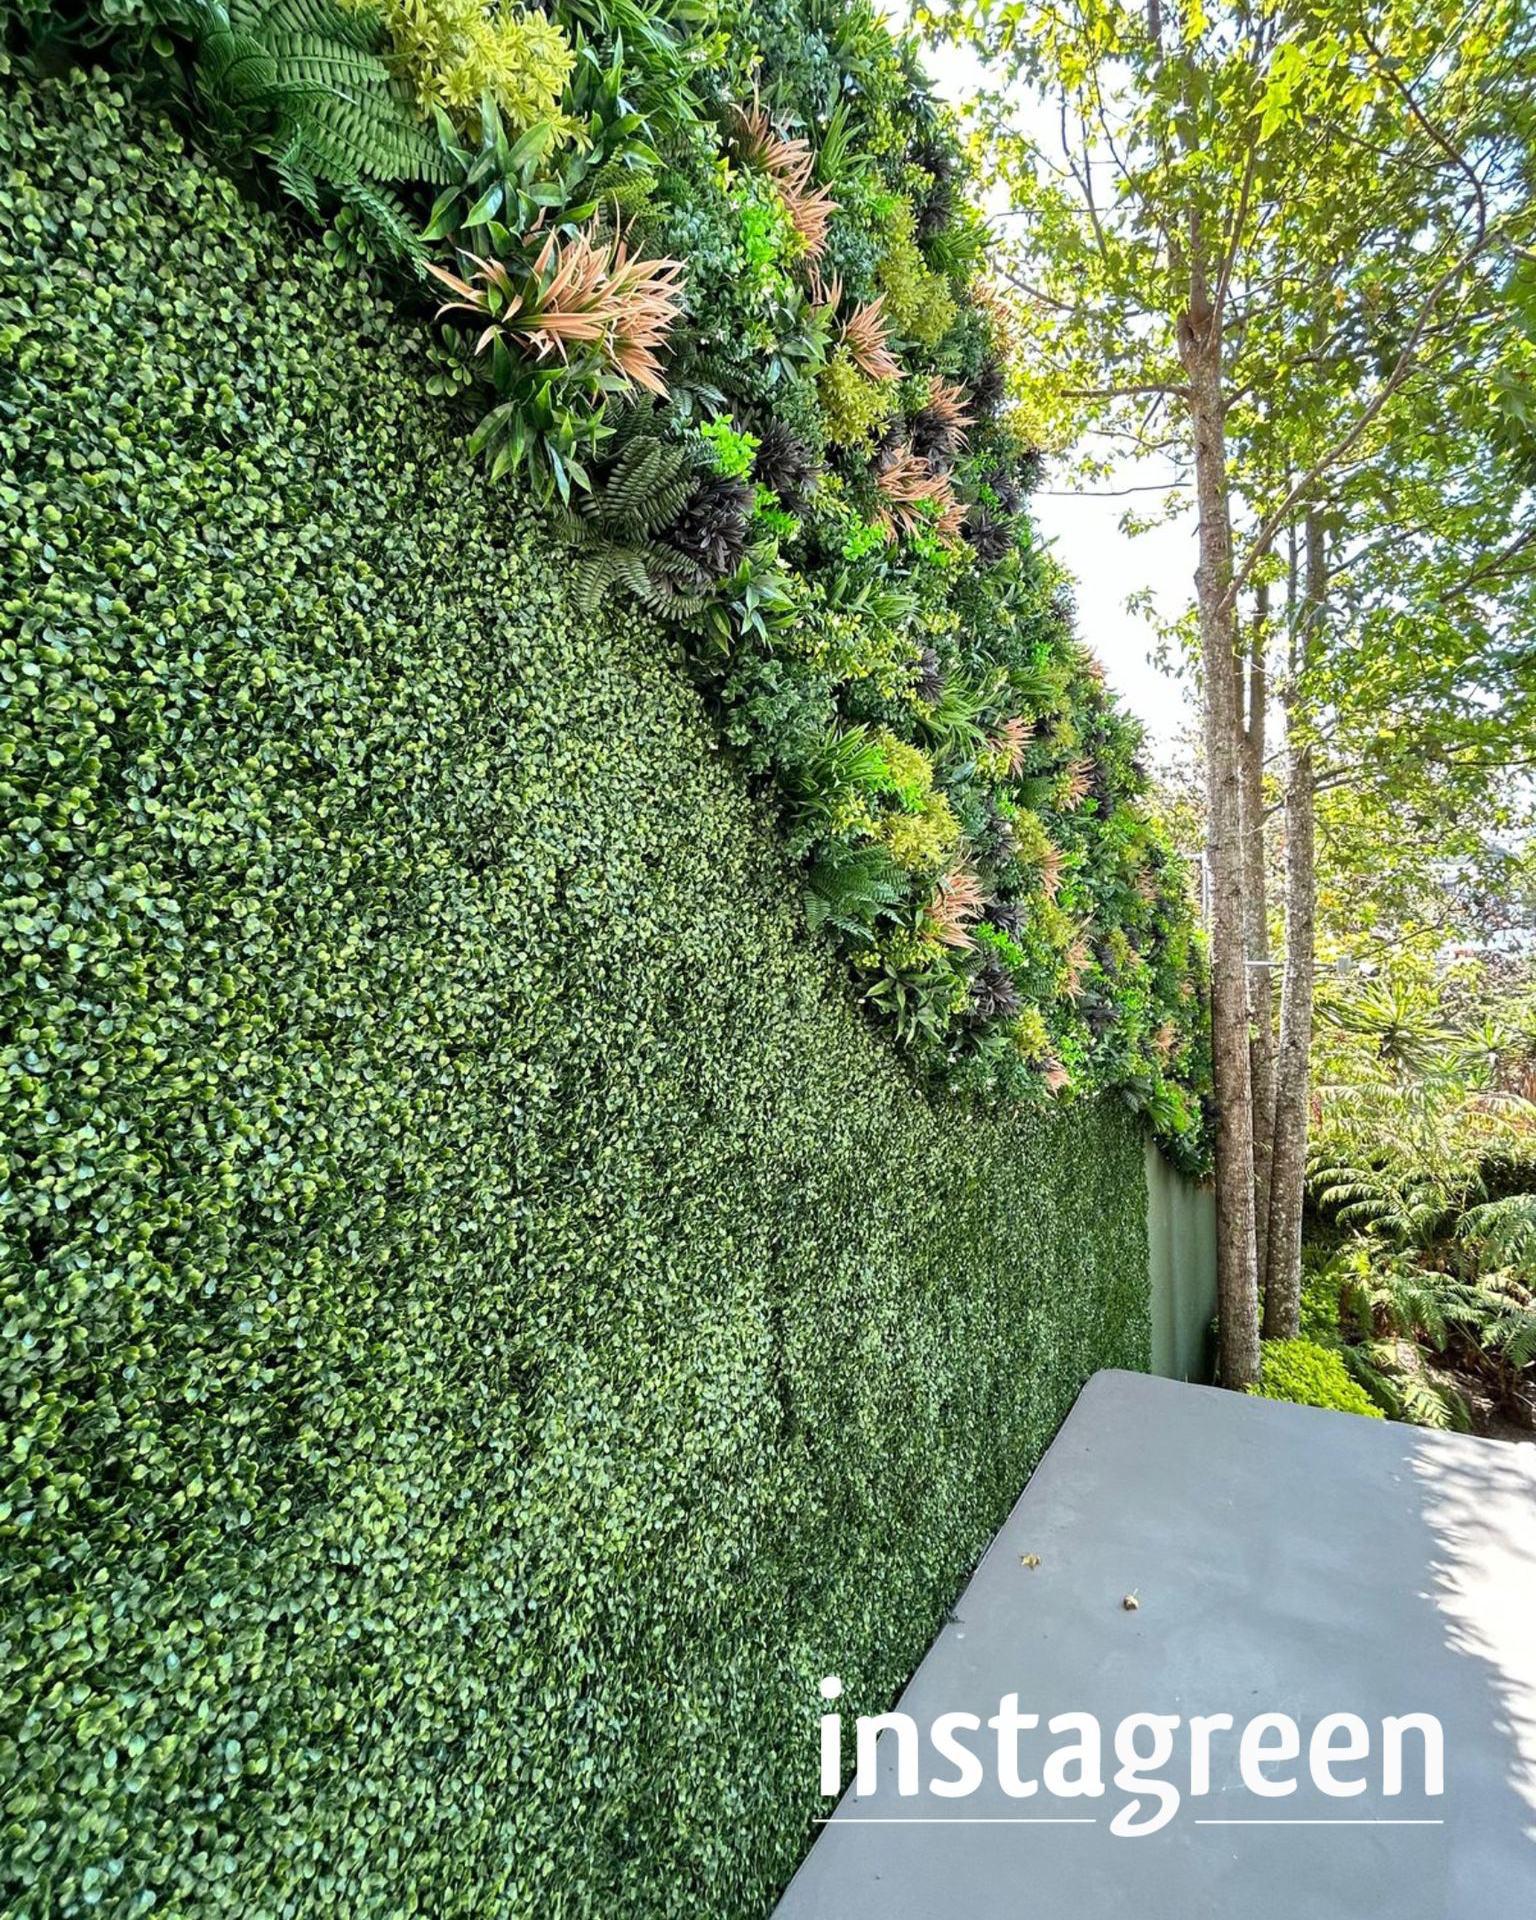 Green wall
garden
renovations
#1 artificial grass and wall in San Diego CA Instagreen San Diego San Diego (858)372-6665